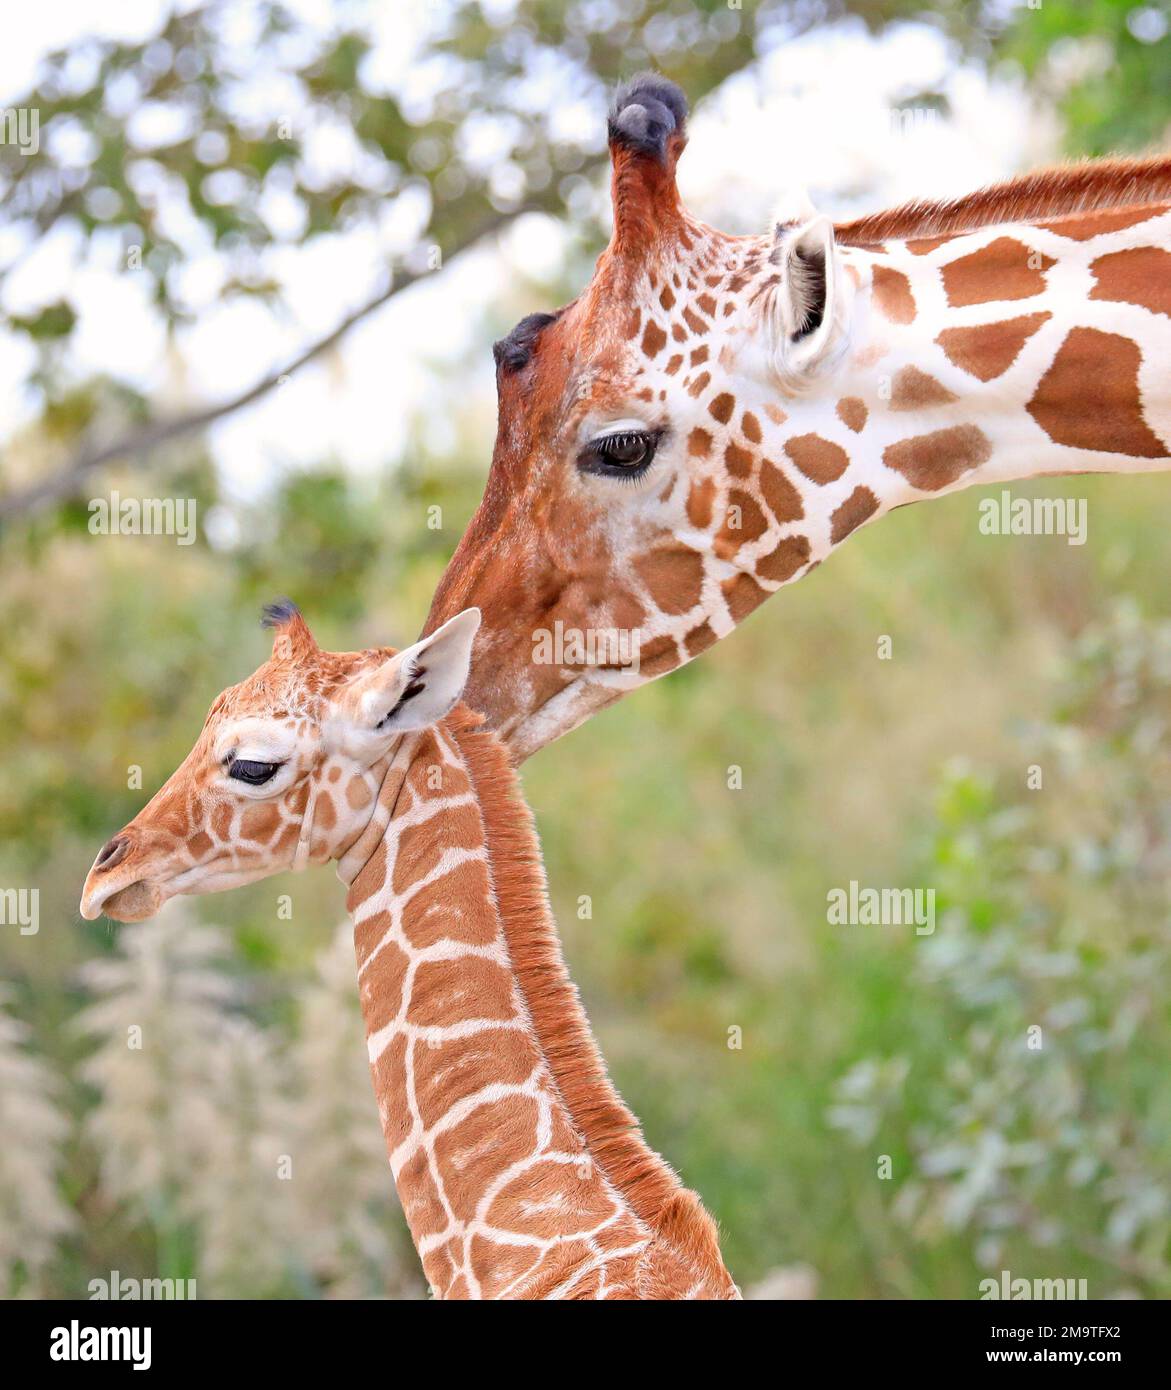 Mother giraffe takes care of her little cub close up Stock Photo